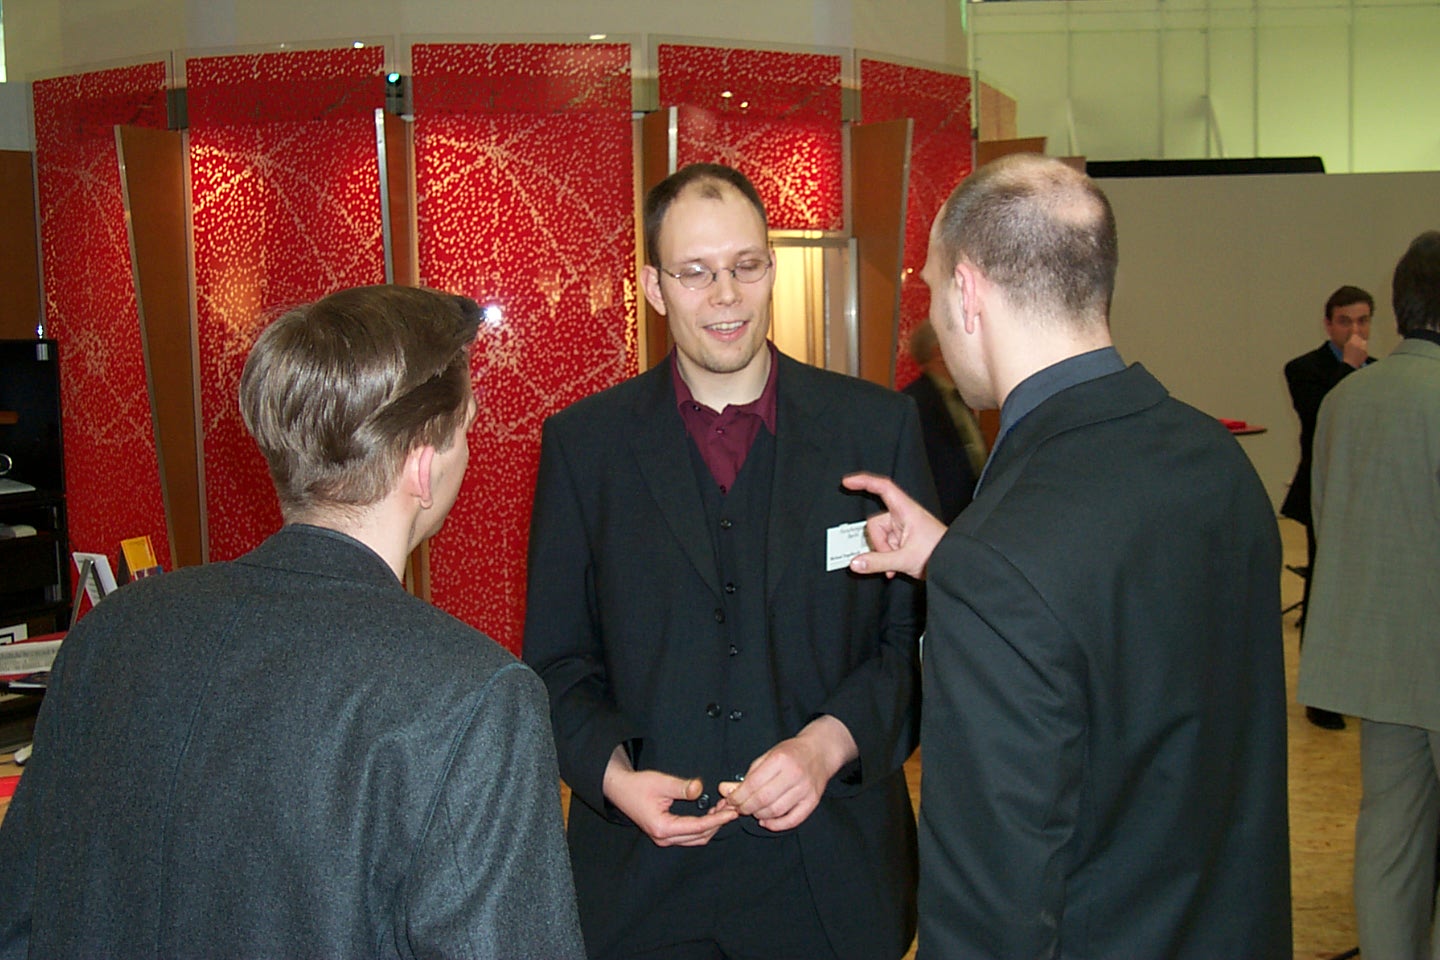 Dietmar, Michael and Matthias in discussion